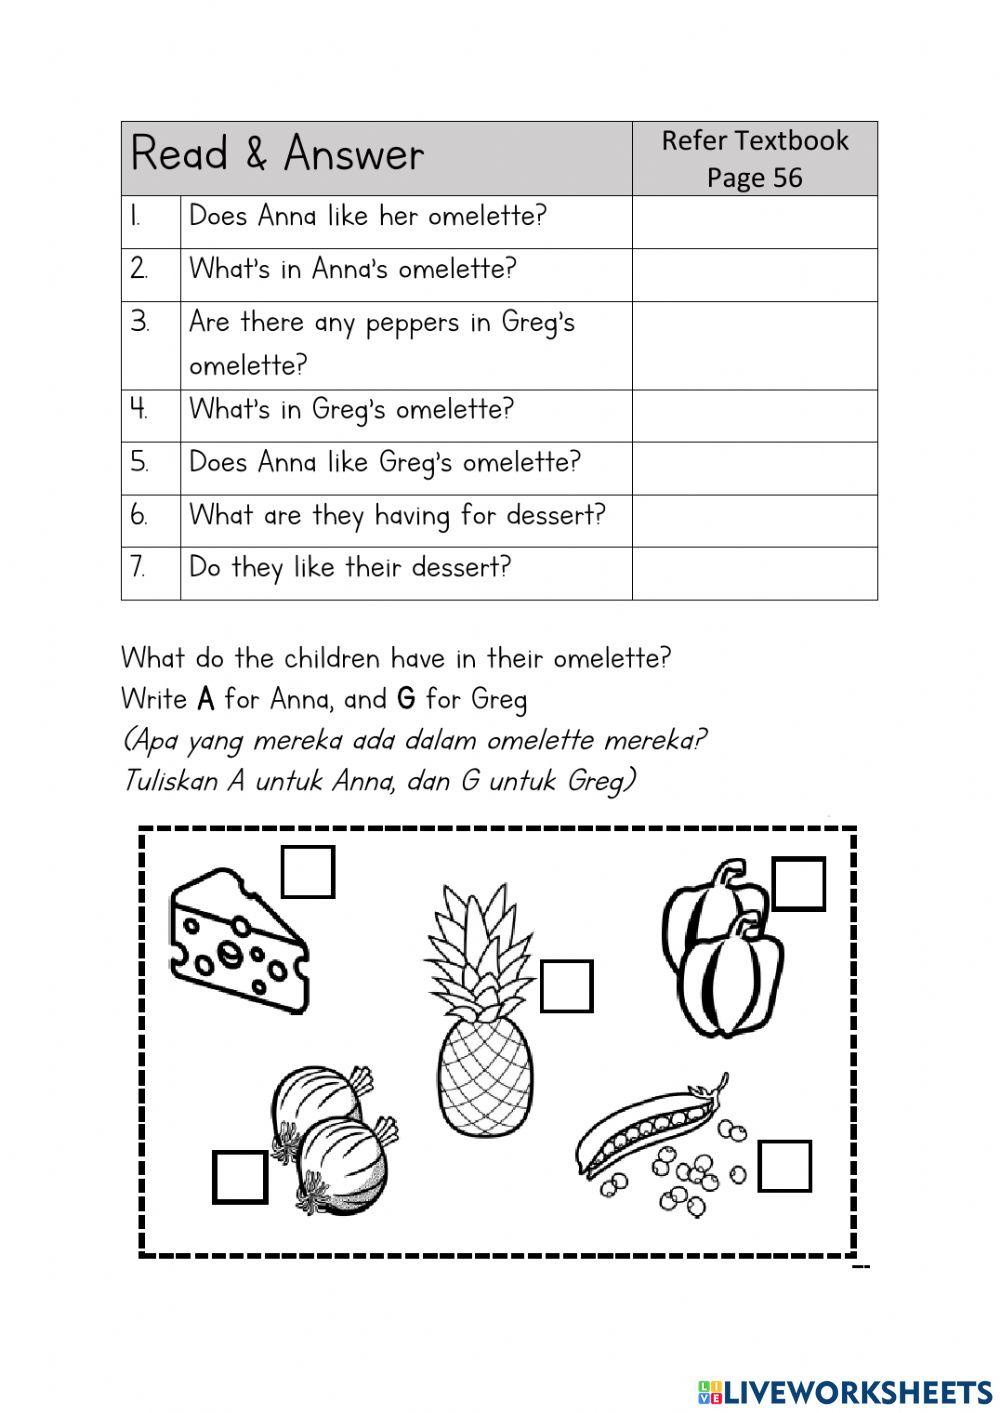 Year 3 Module 6 - Page 56